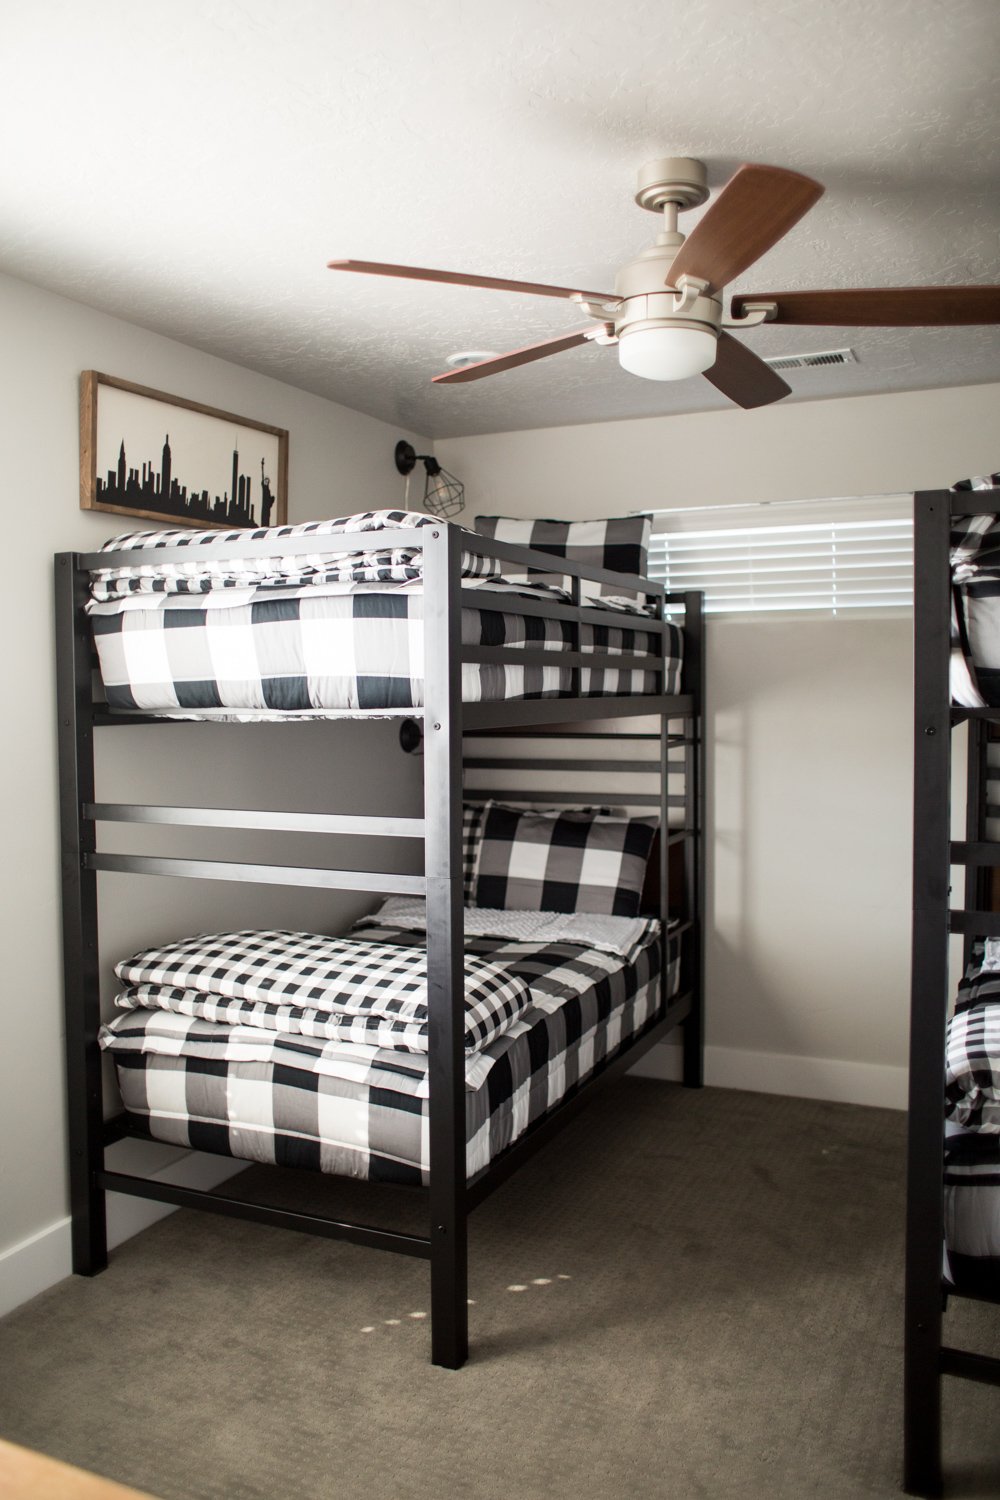 How To Make A Bunkbed In Less Than 5, Bunk Beds And Ceiling Fans